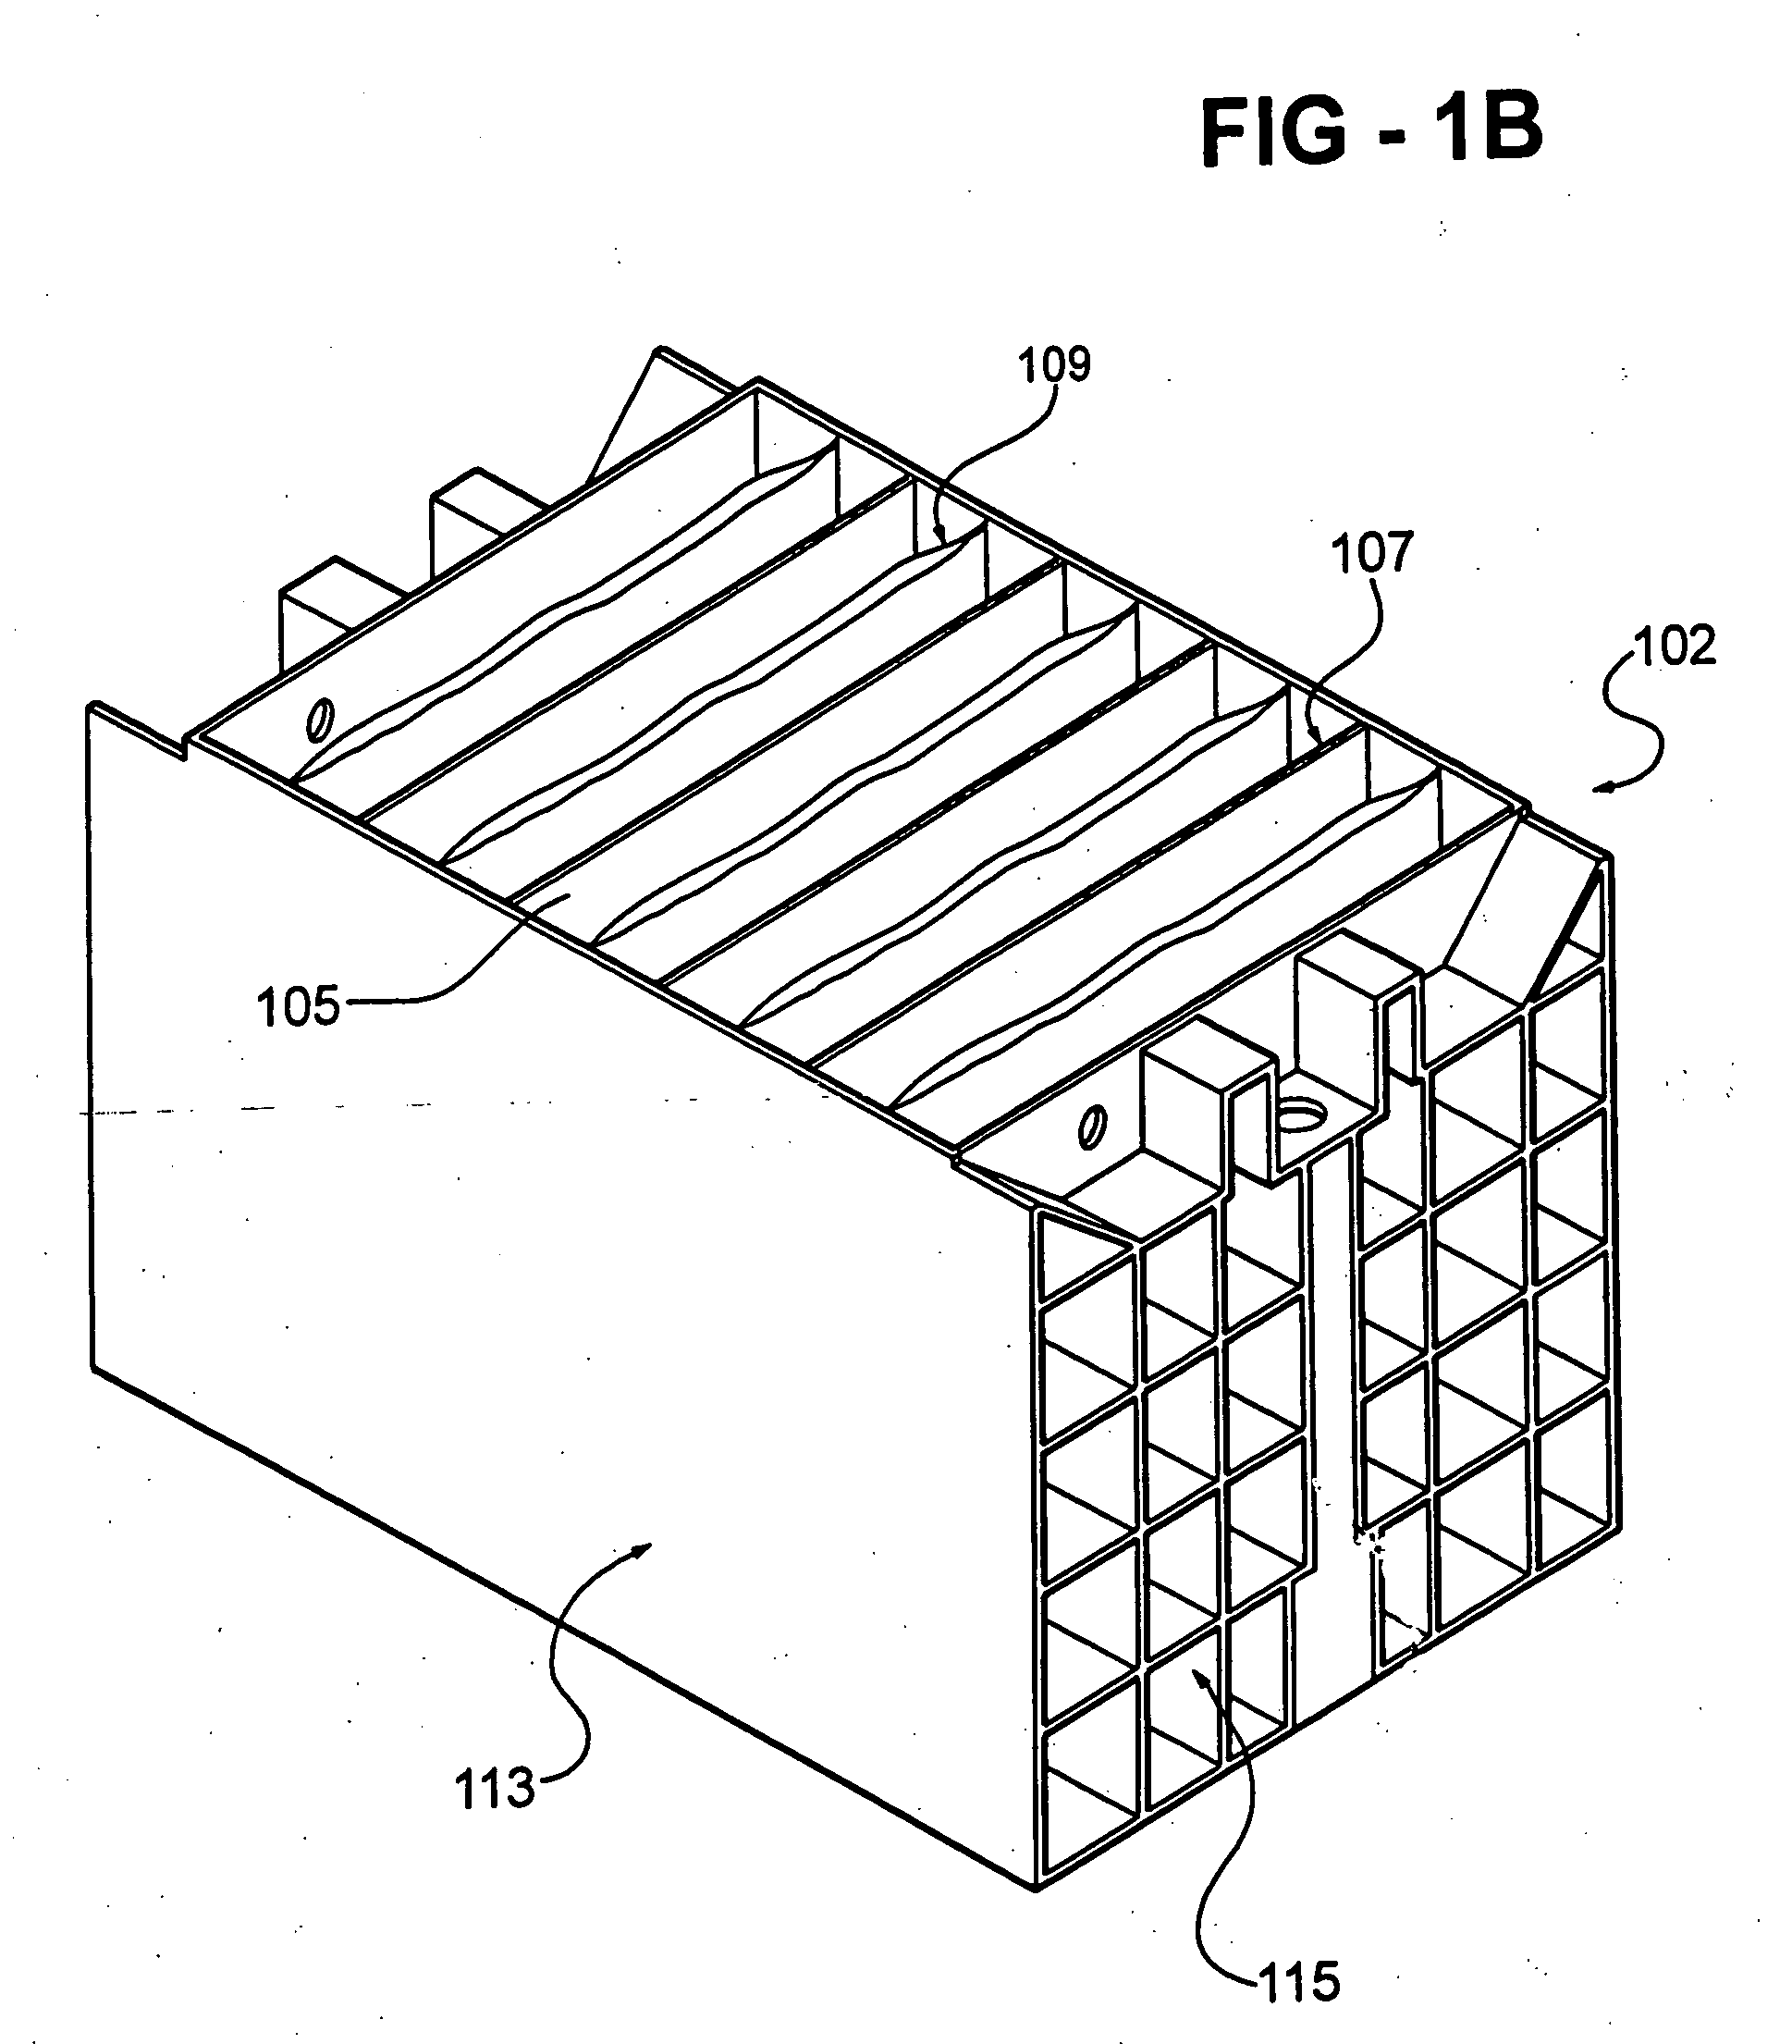 Multi-cell battery assembly